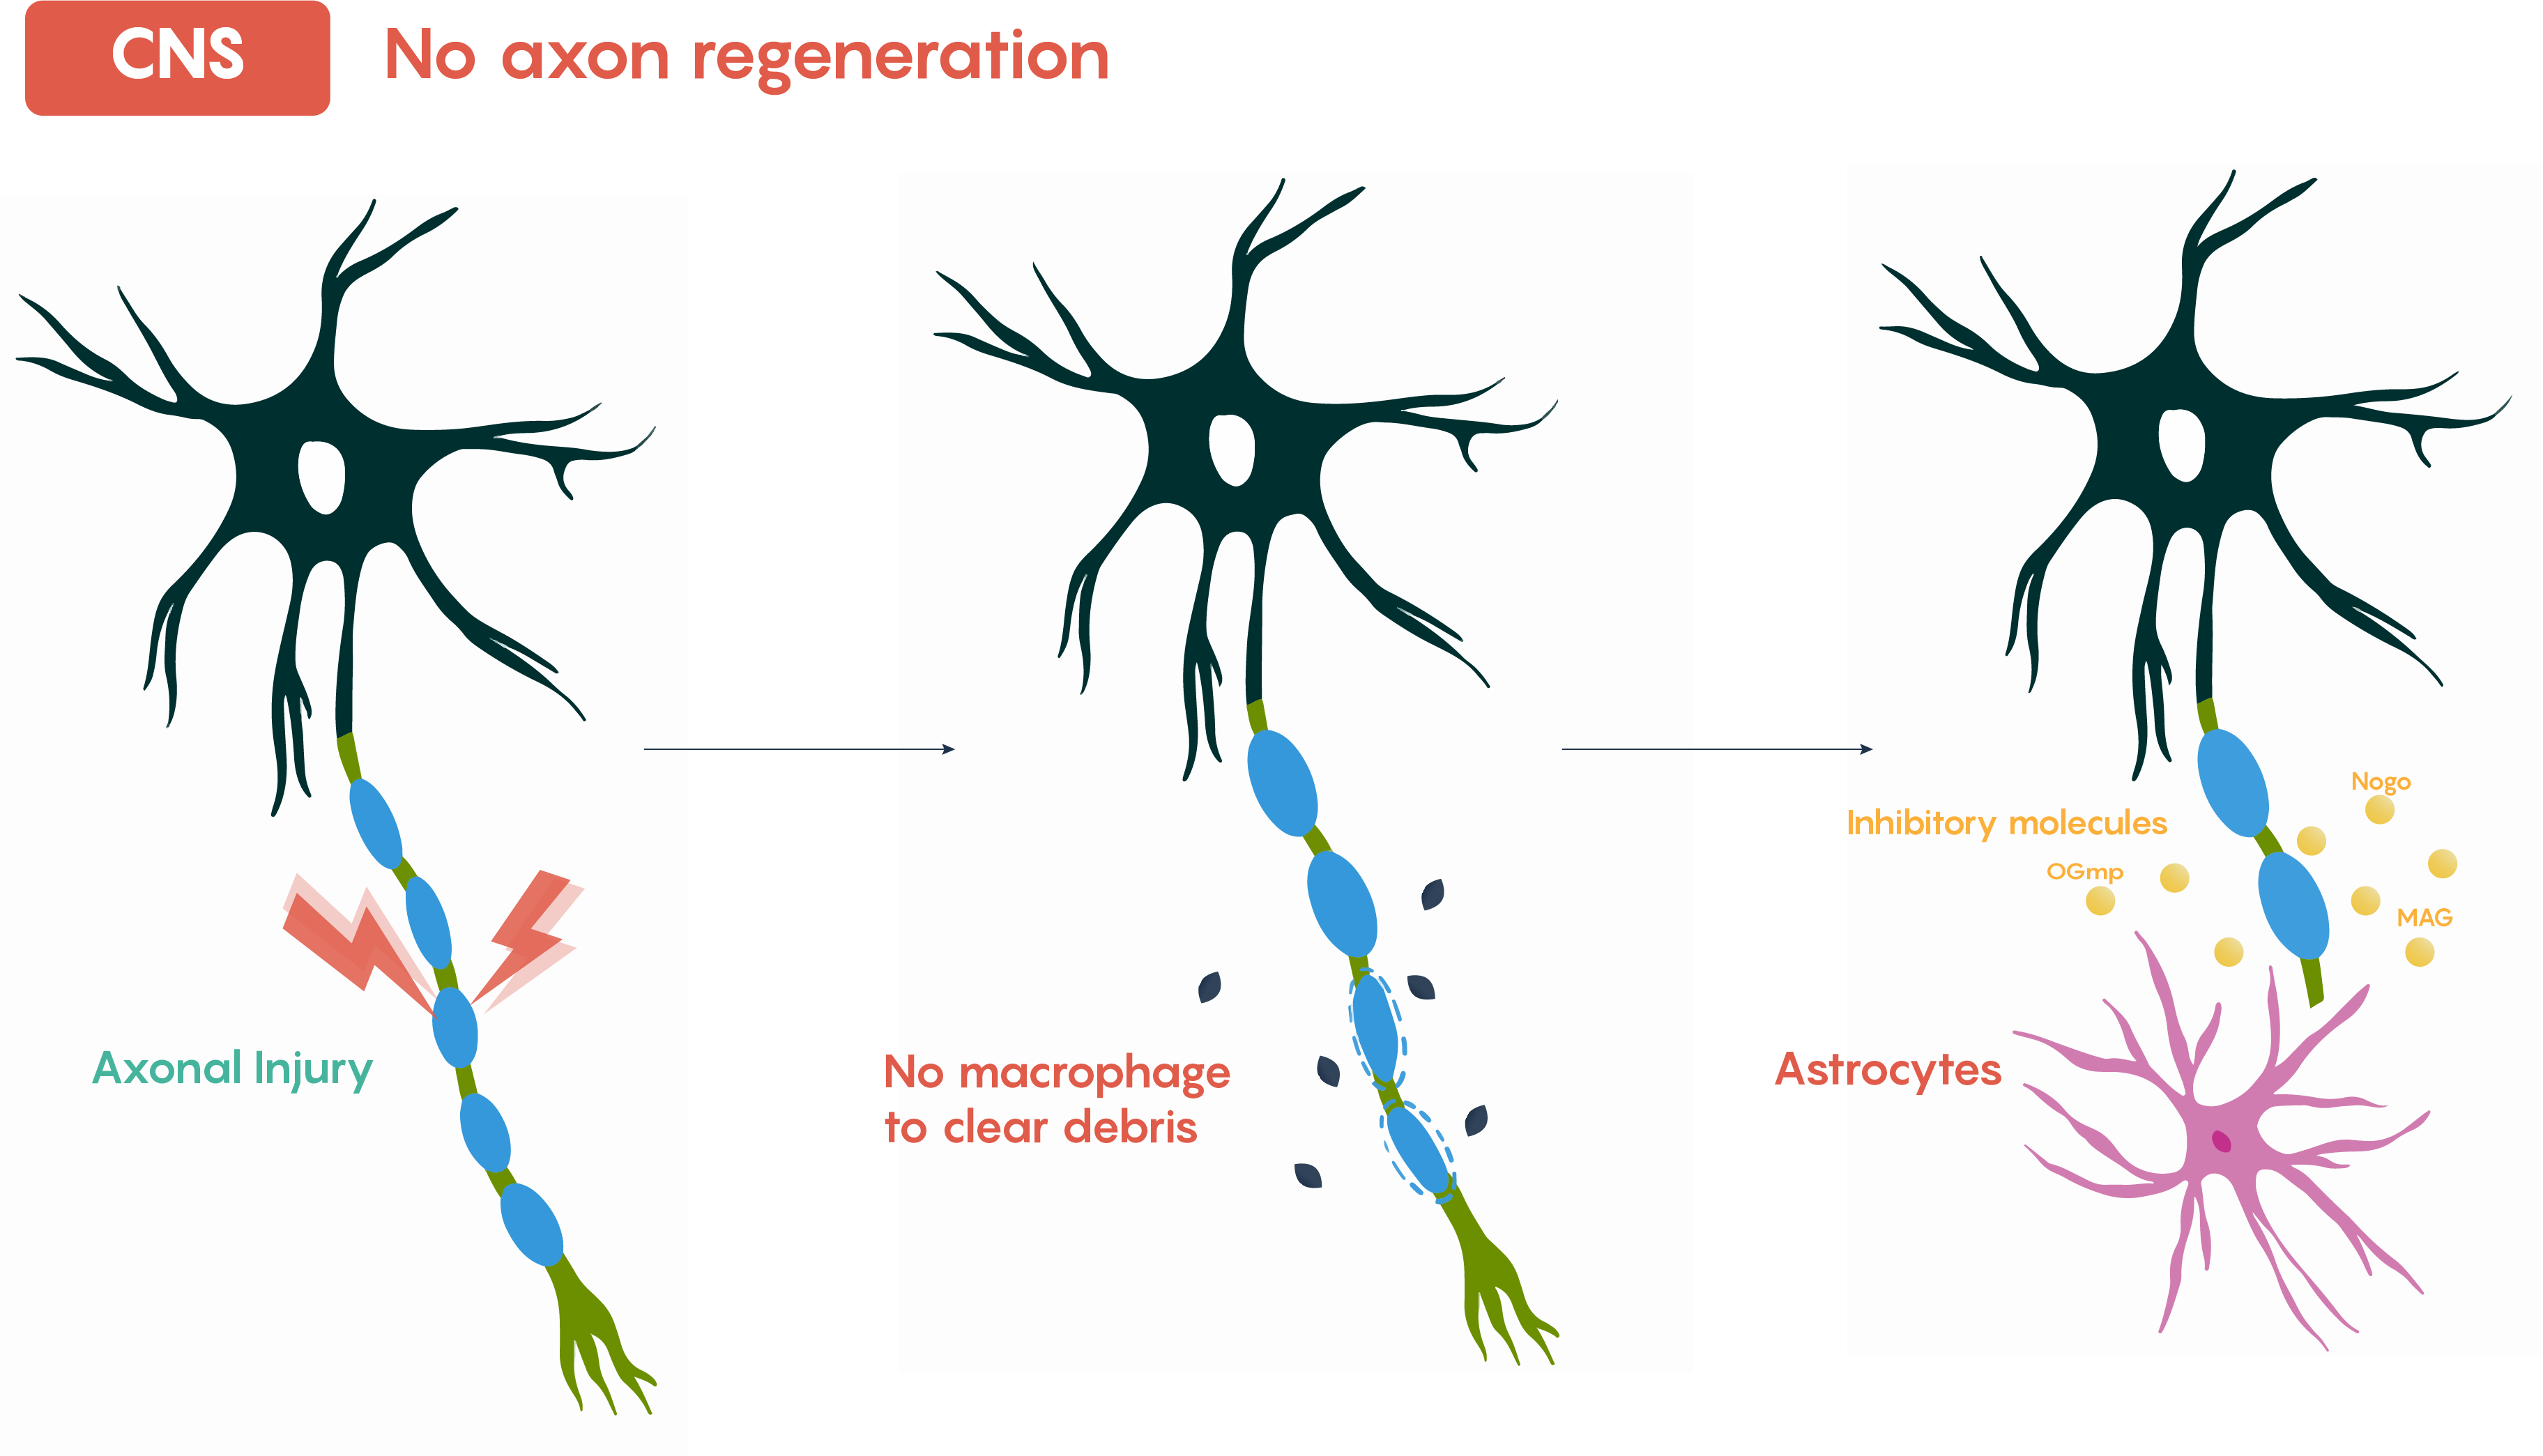 Image shows the lack of axonal regeneration in the CNS.